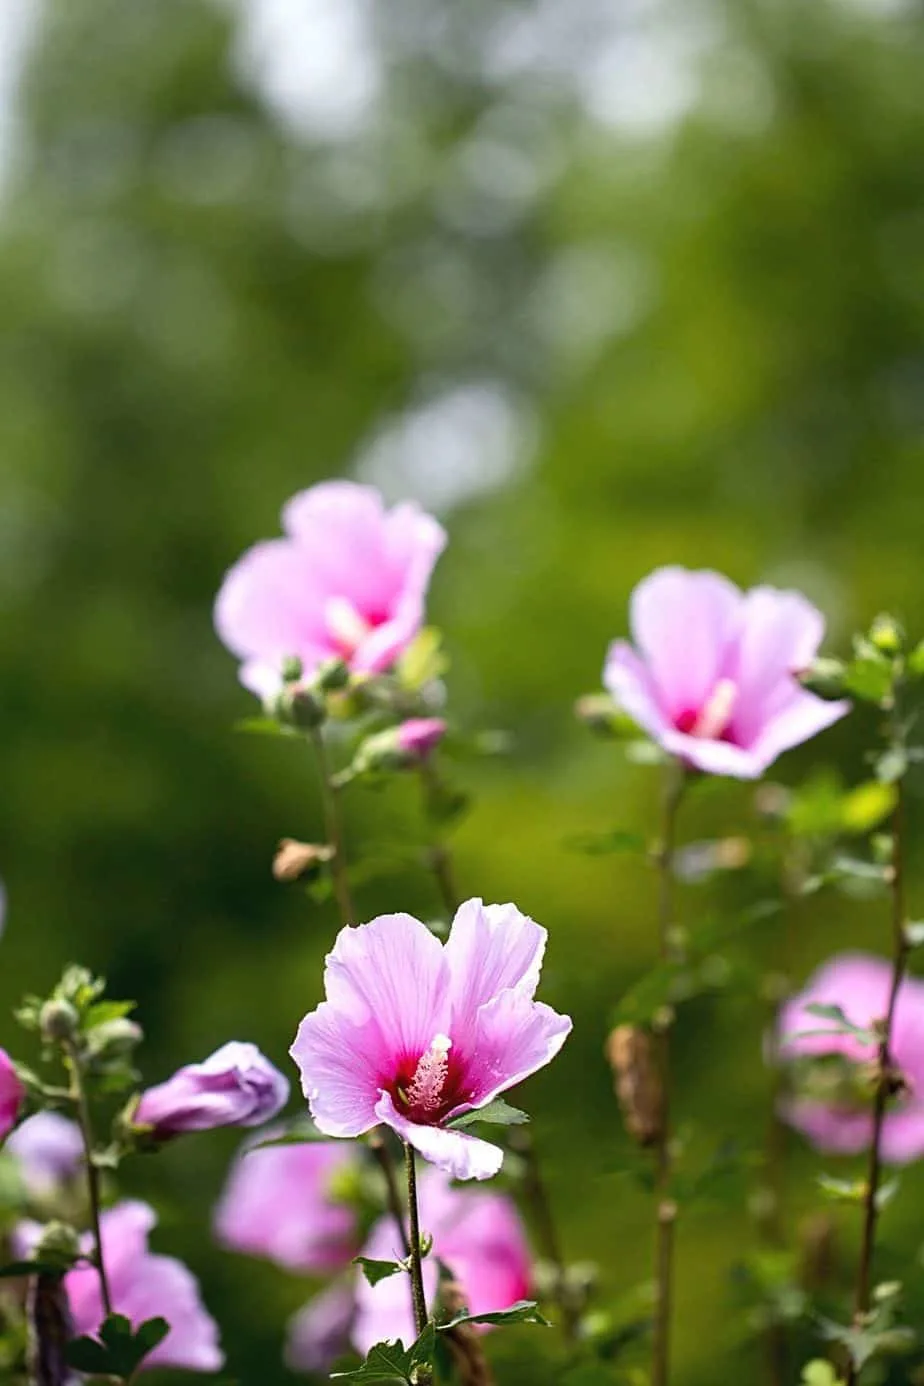 As the Rose of Sharon can grow up to 12 feet tall, it's one of the best plants to grow for privacy